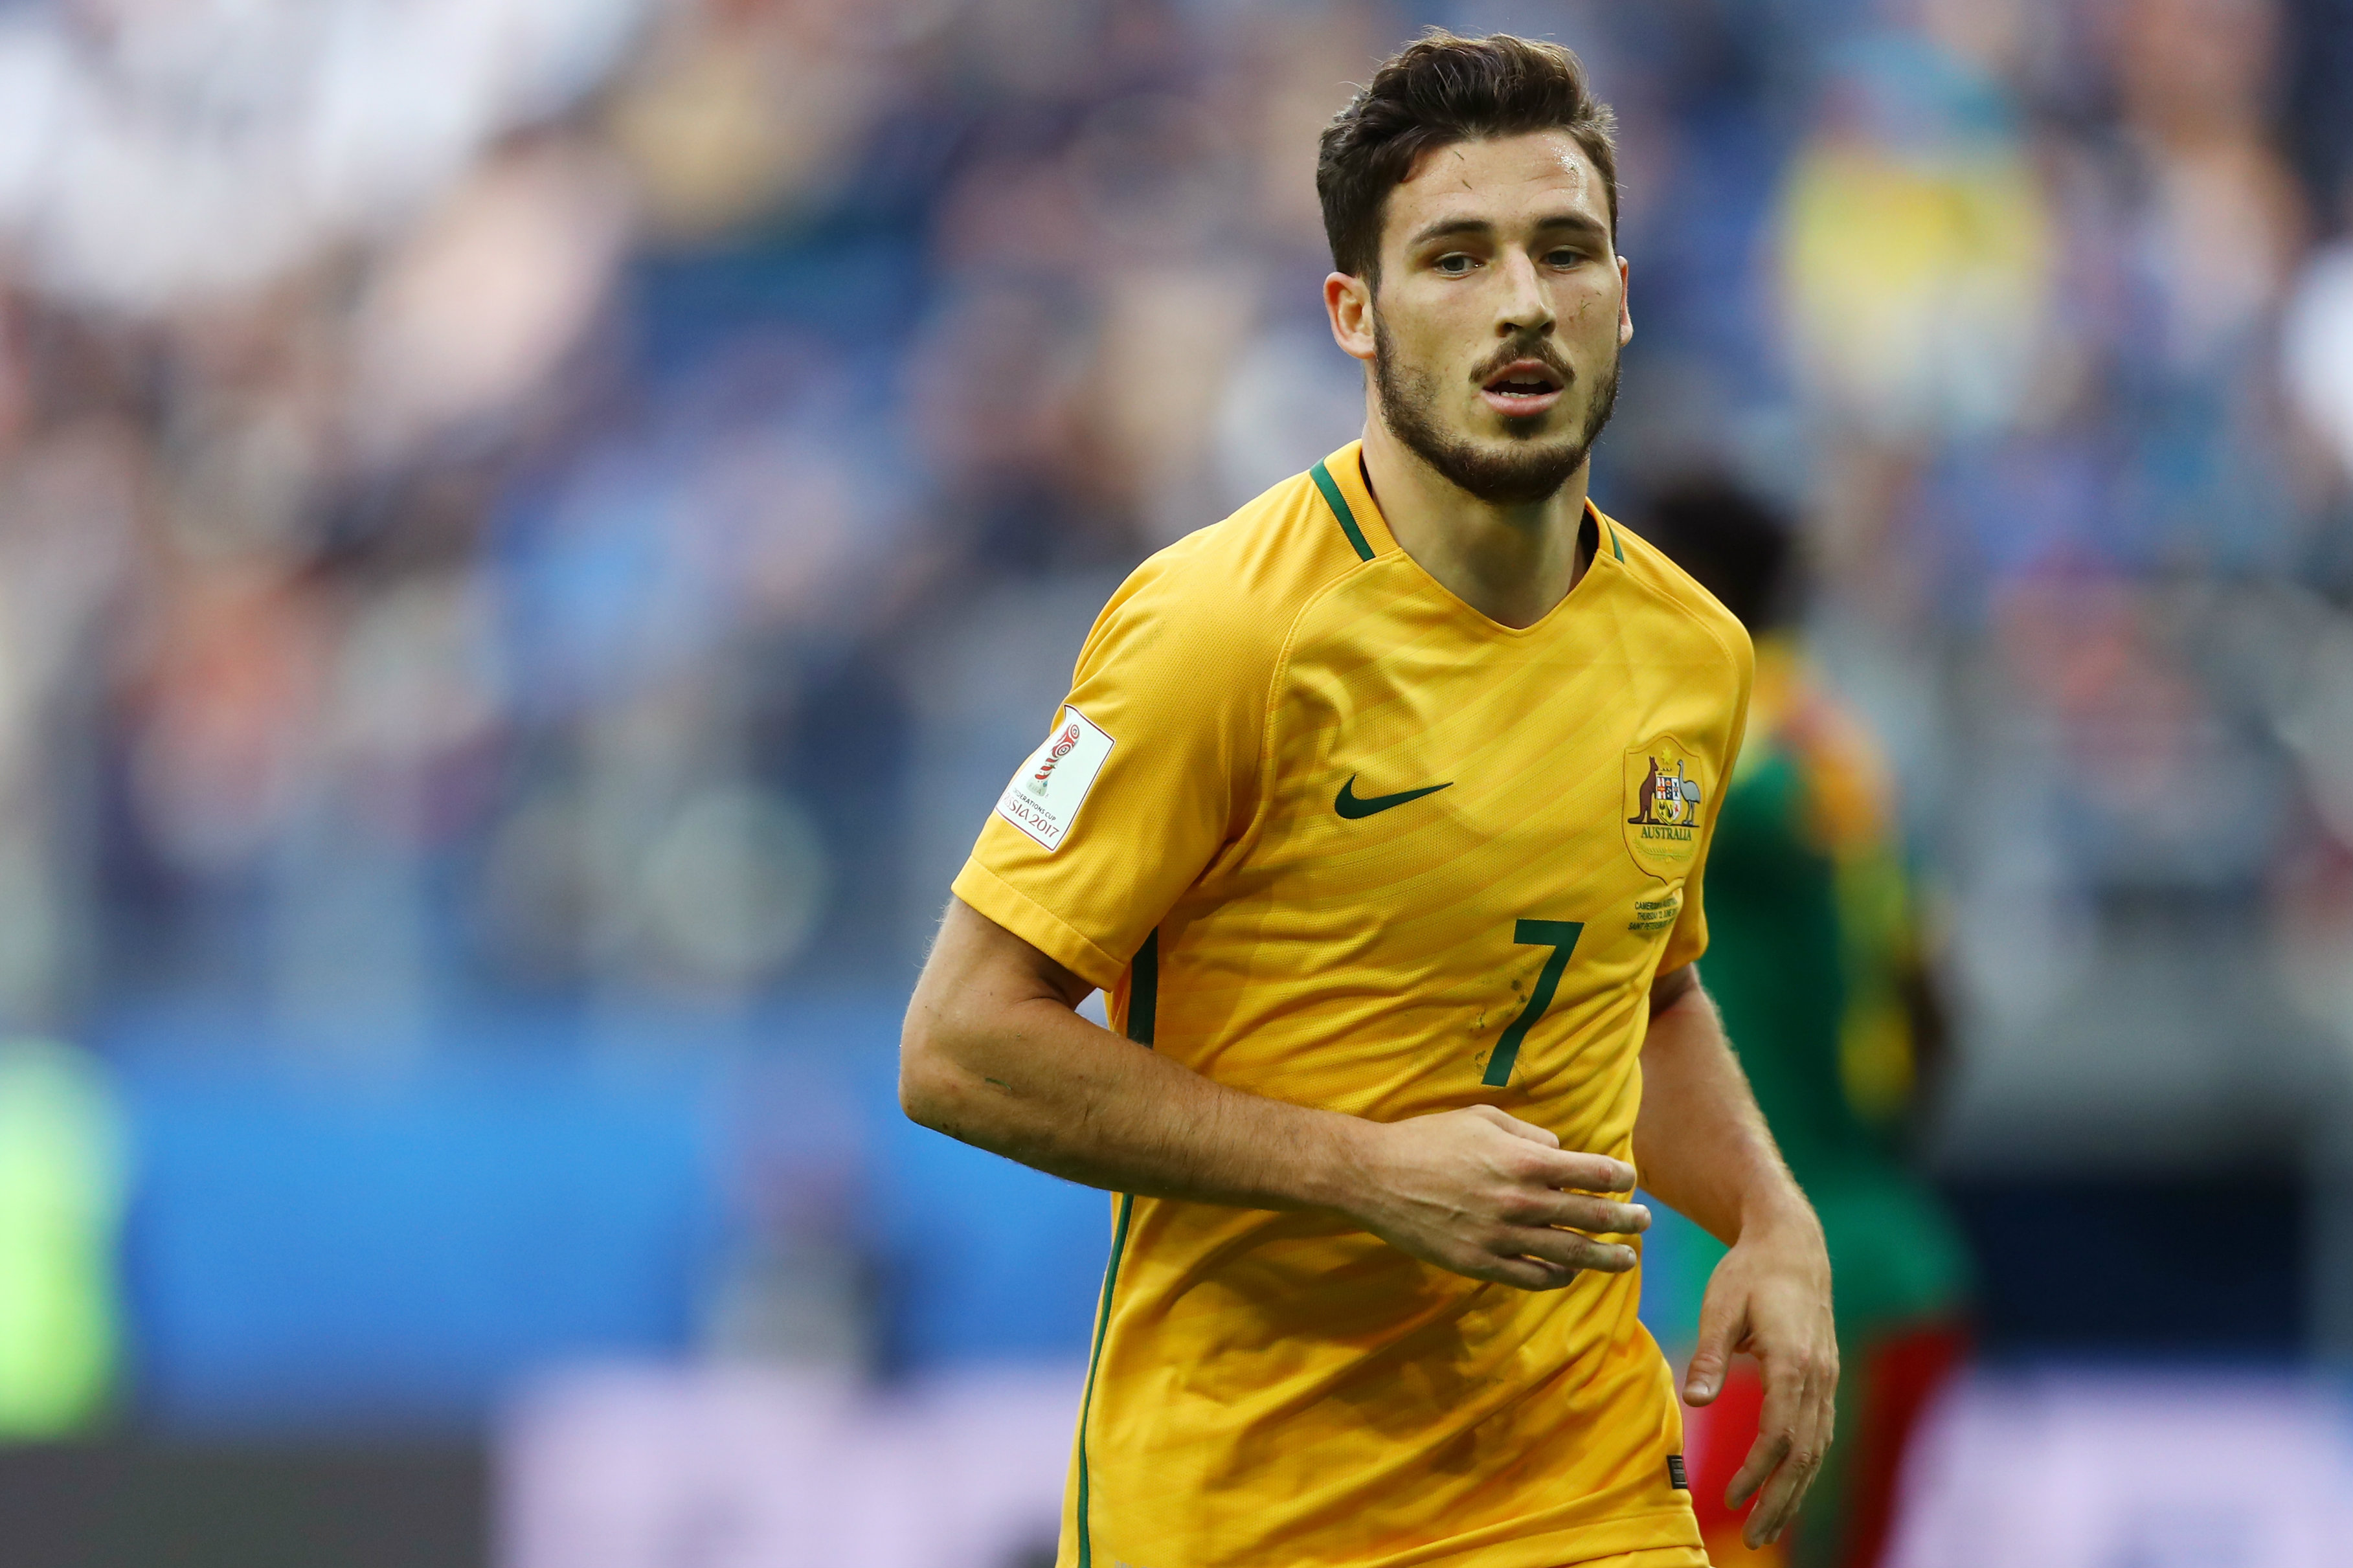 Leckie says he's unfazed by his new wing-back role with the Caltex Socceroos.